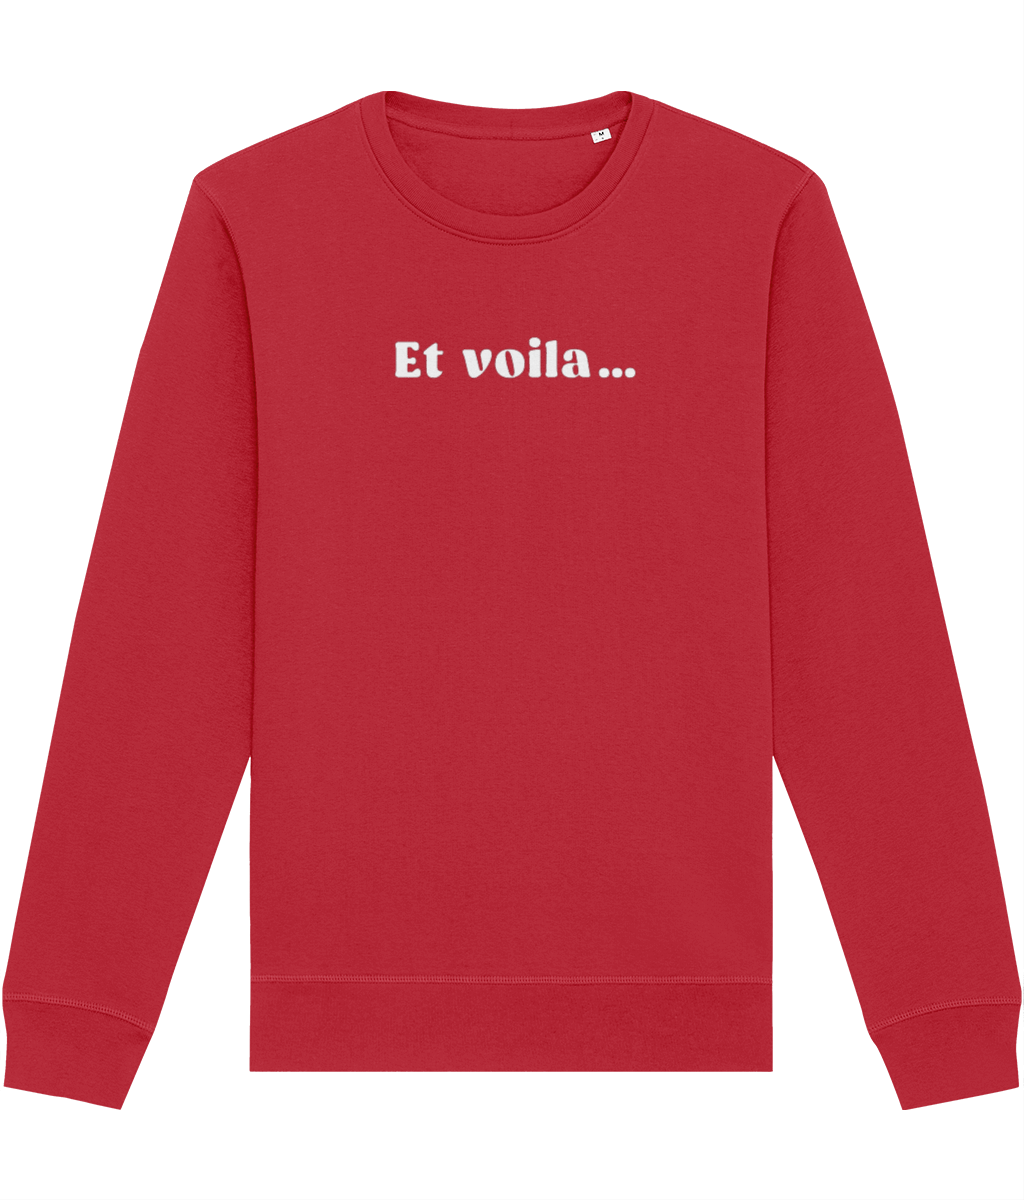 Francophile 'And There It Is' Organic Cotton Sweatshirt - French Gift